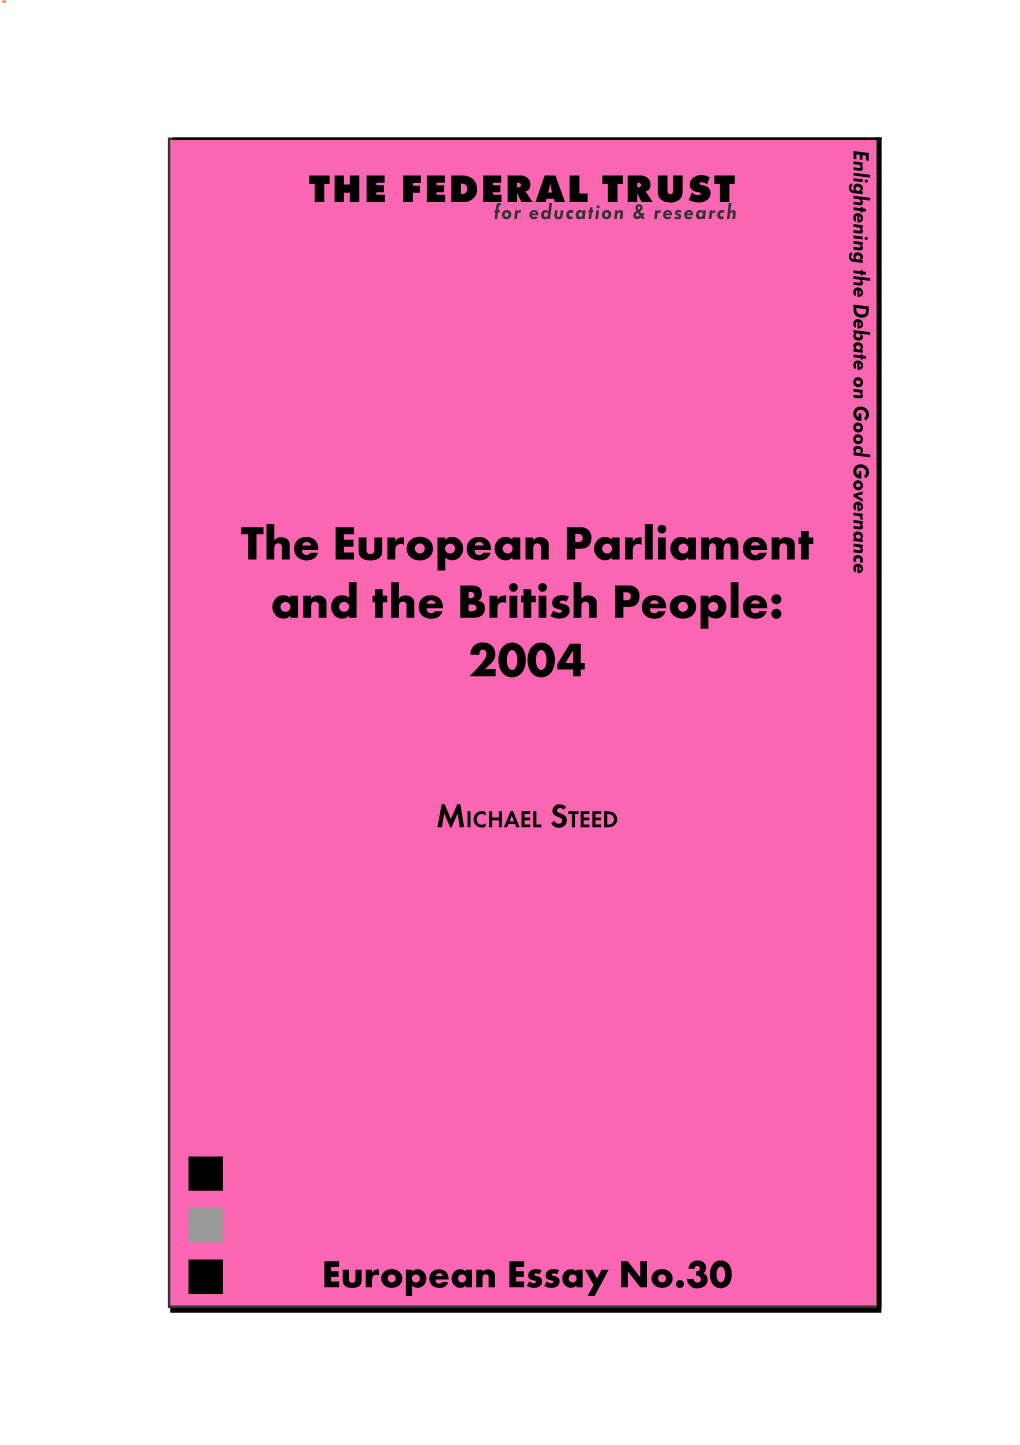 The European Parliament and the British People: 2004